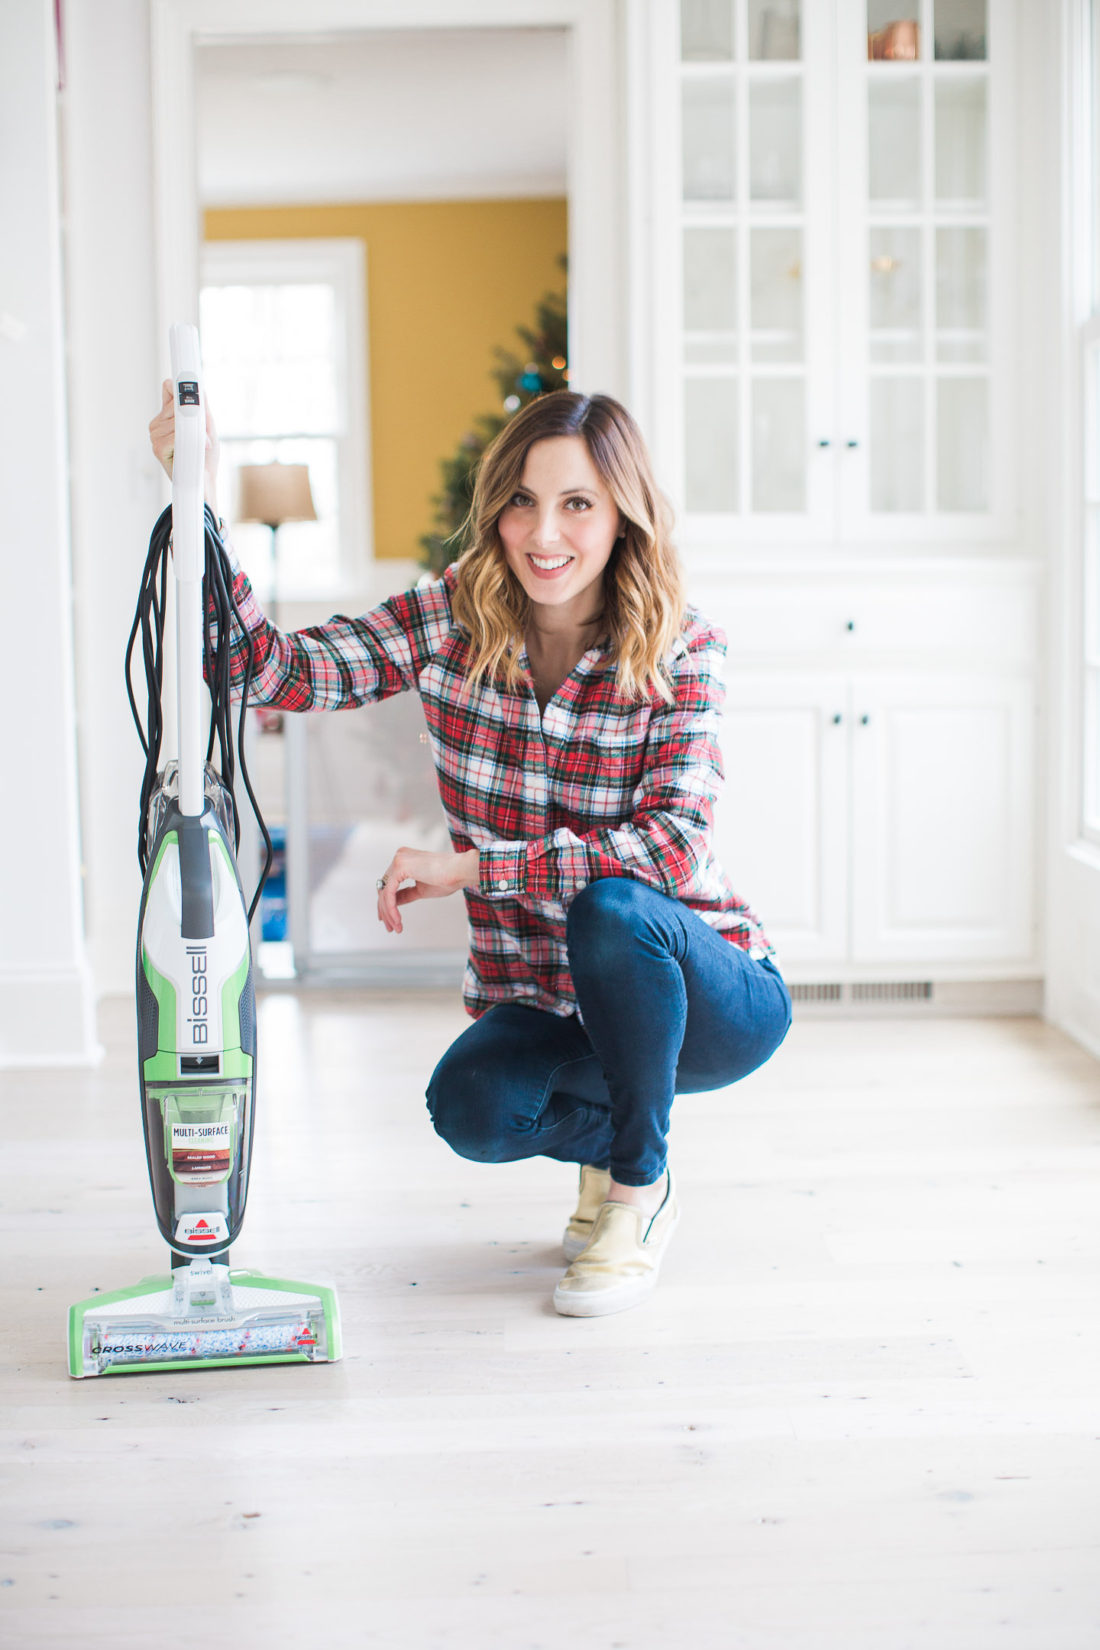 Eva Amurri martino uses the Bissell Crosswave cleaning system to prep her home for holiday parties